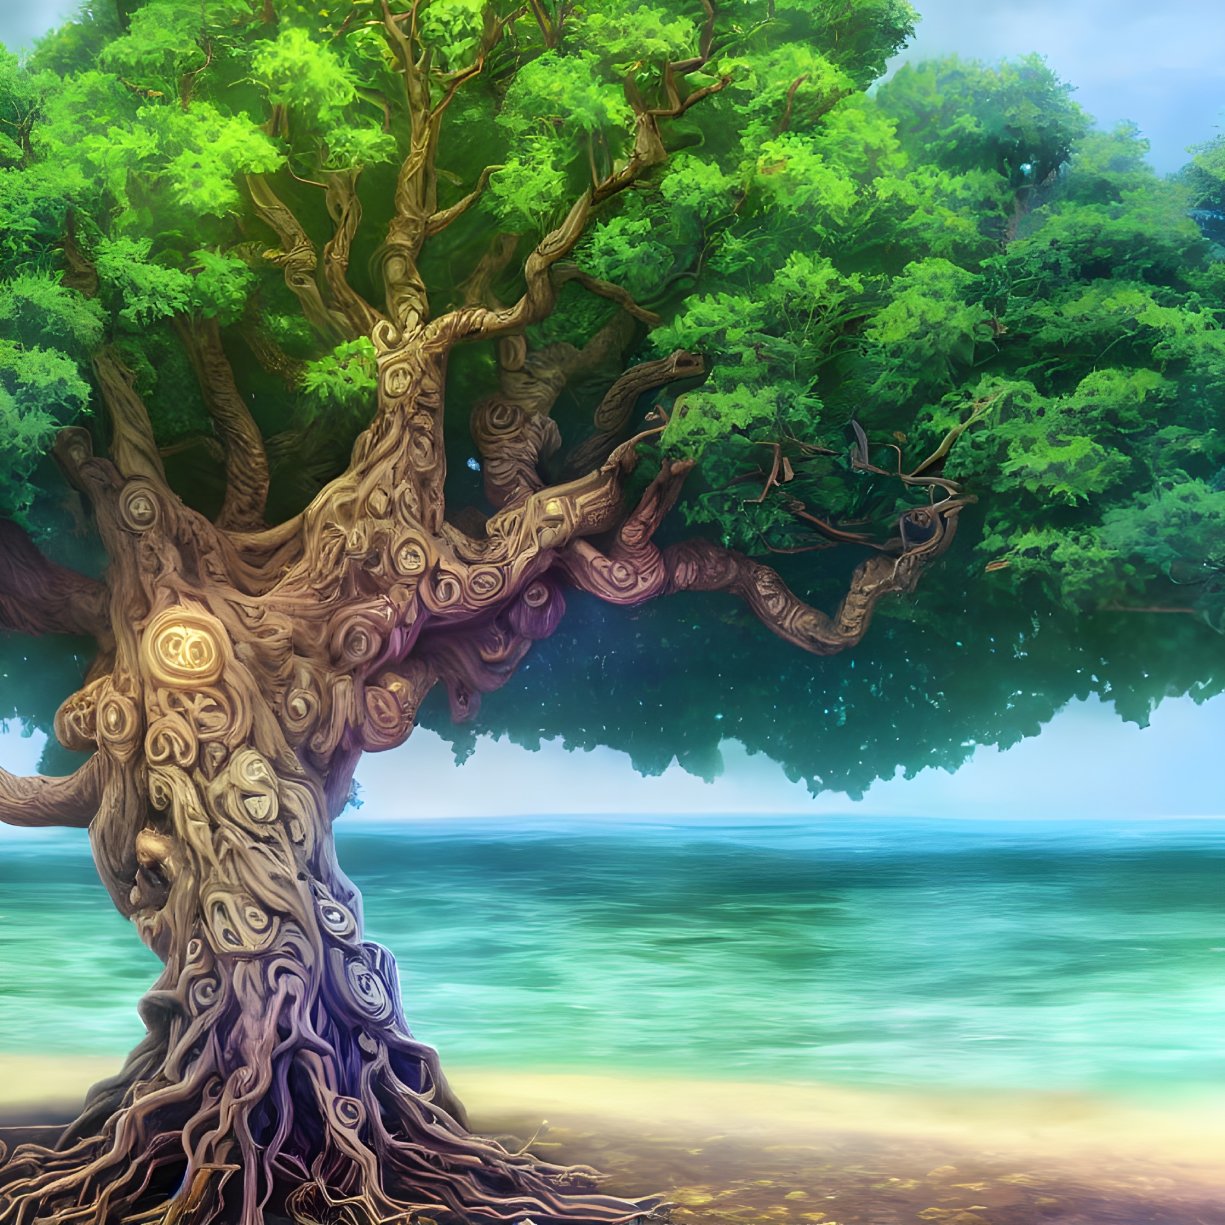 Majestic tree with intricate bark patterns and lush green foliage by serene water